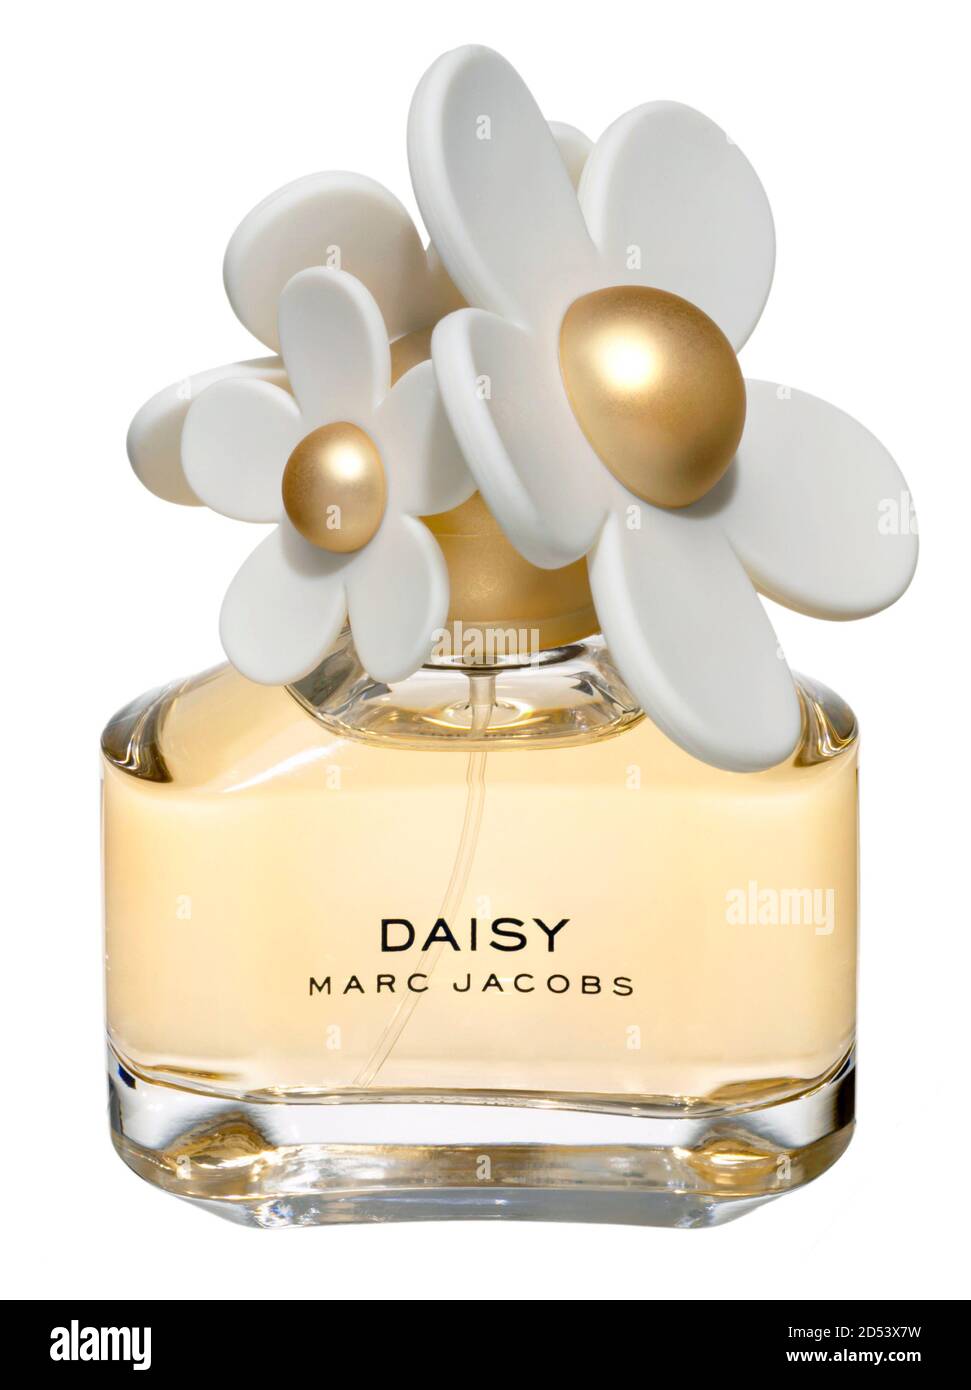 Marc jacobs perfume hi-res stock photography and images - Alamy